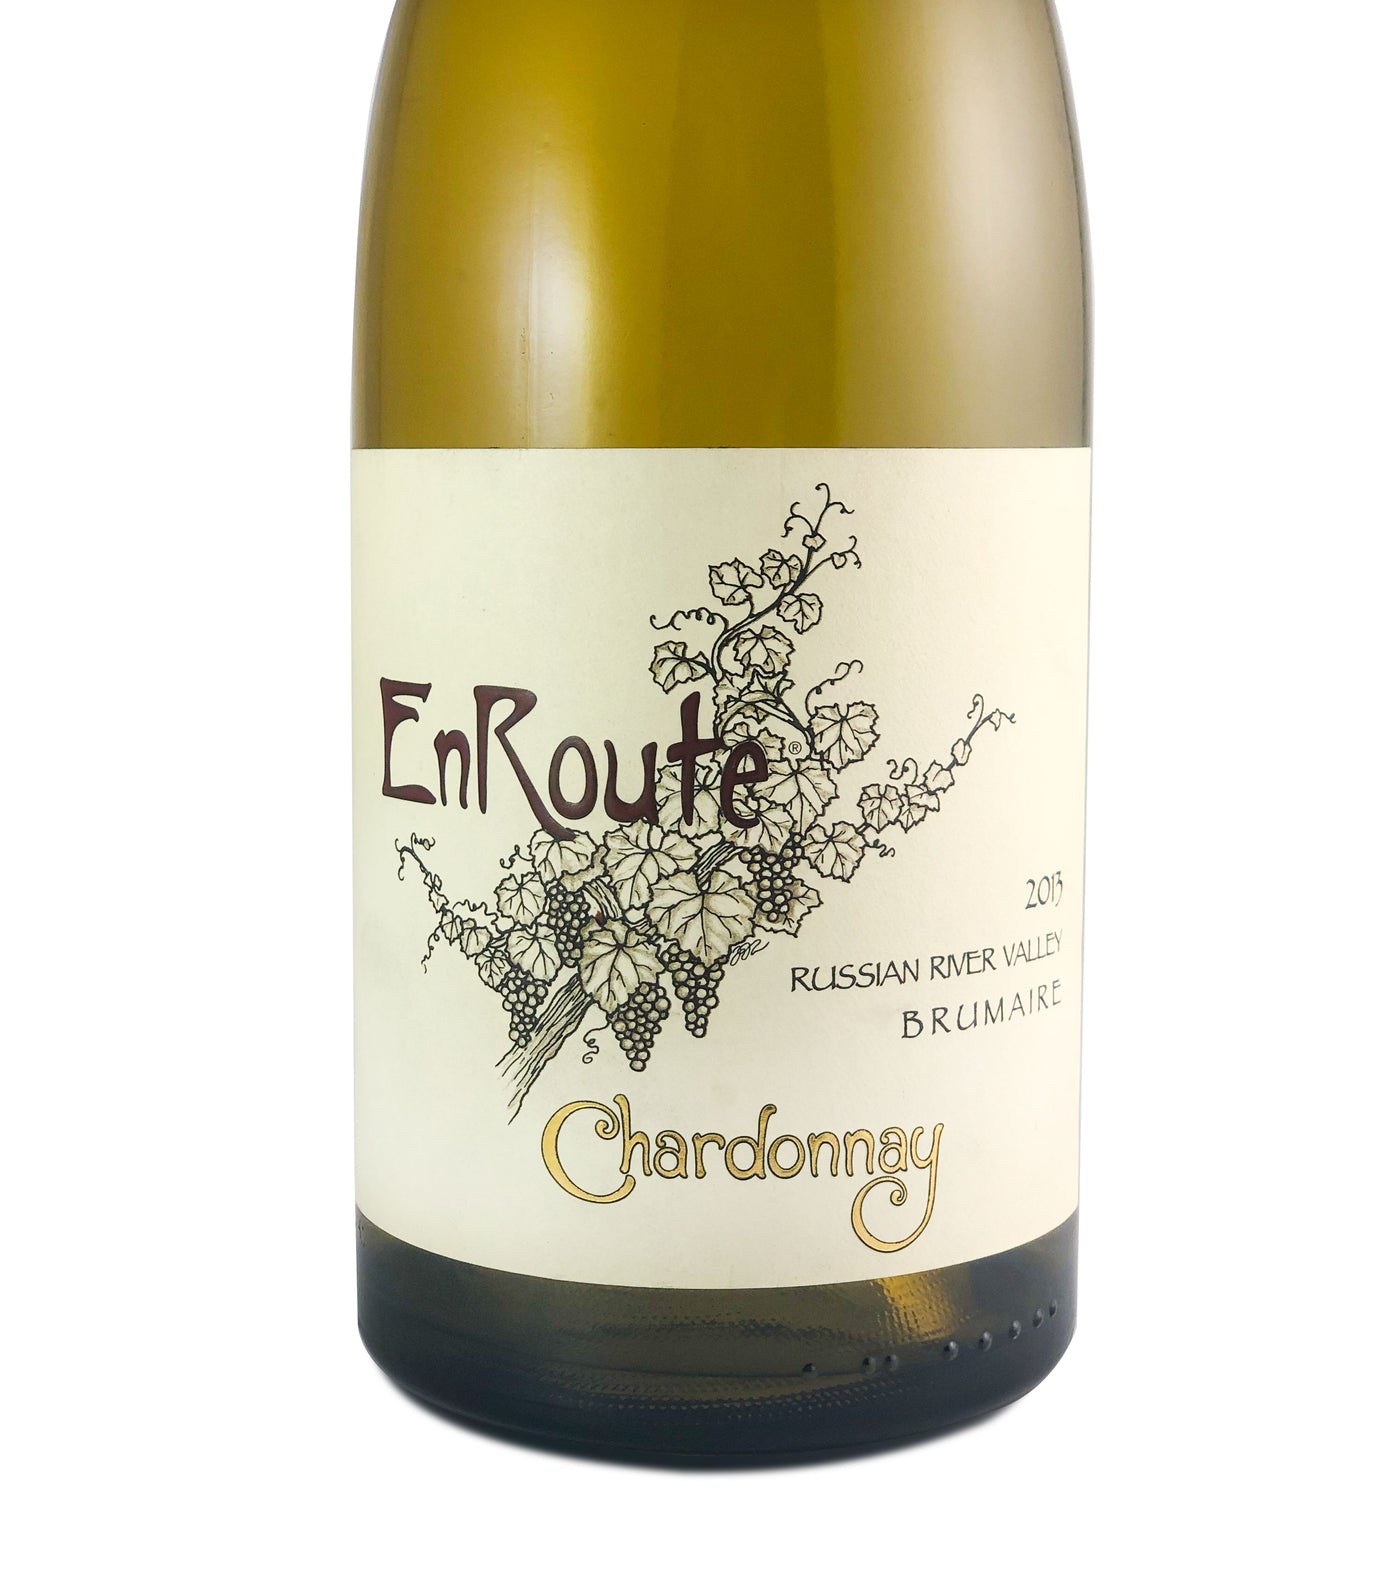 EnRoute Winery Brumaire Chardonnay 2013